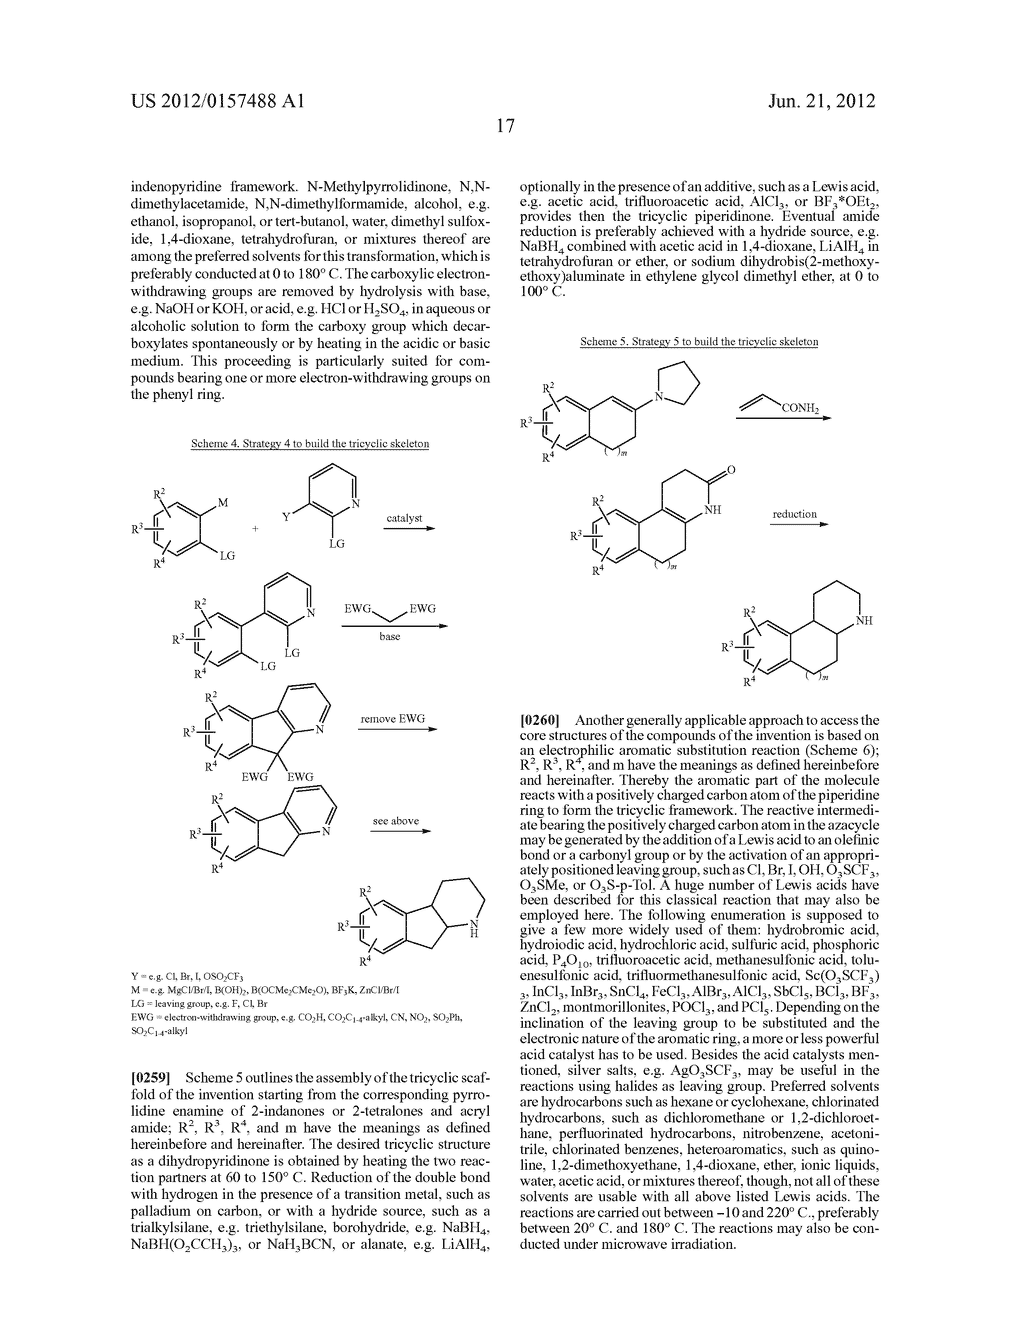 ARYL-AND HETEROARYLCARBONYL DERIVATIVES OF HEXAHYDROINDENOPYRIDINE AND     OCTAHYDROBENZOQUINOLINE - diagram, schematic, and image 26